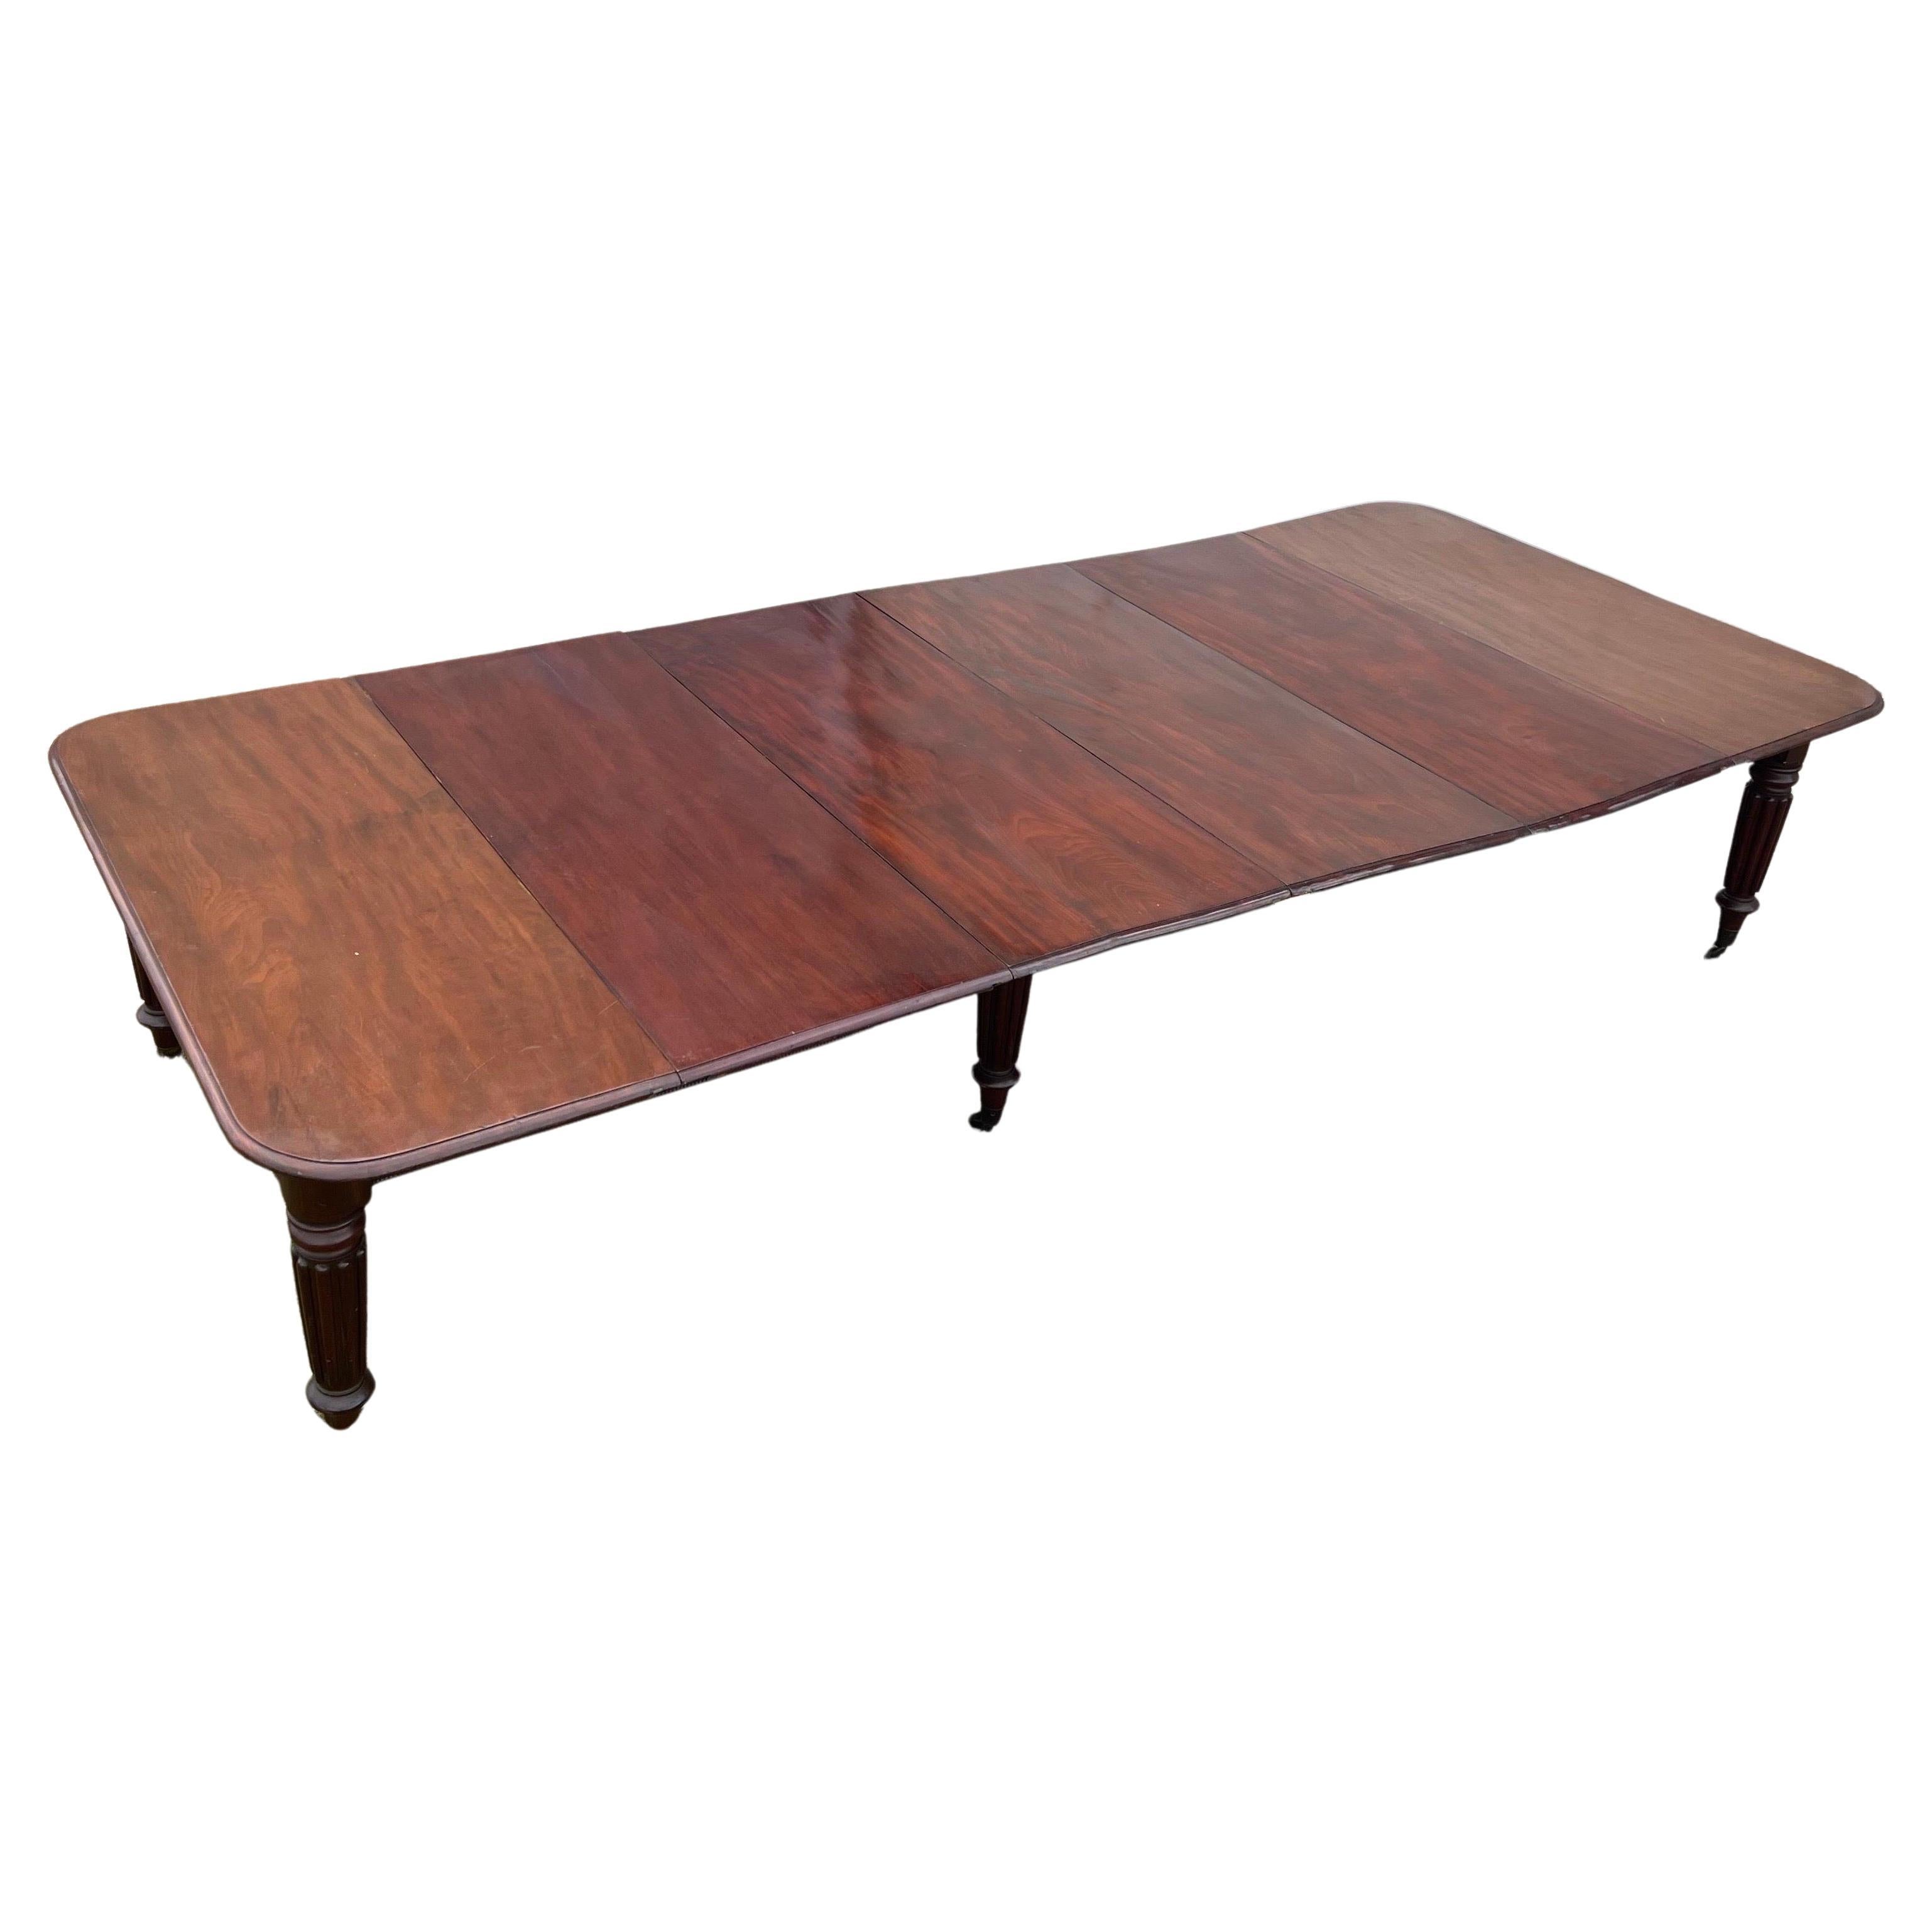 19th Century English Mahogany Dining Table, likely by Gillows